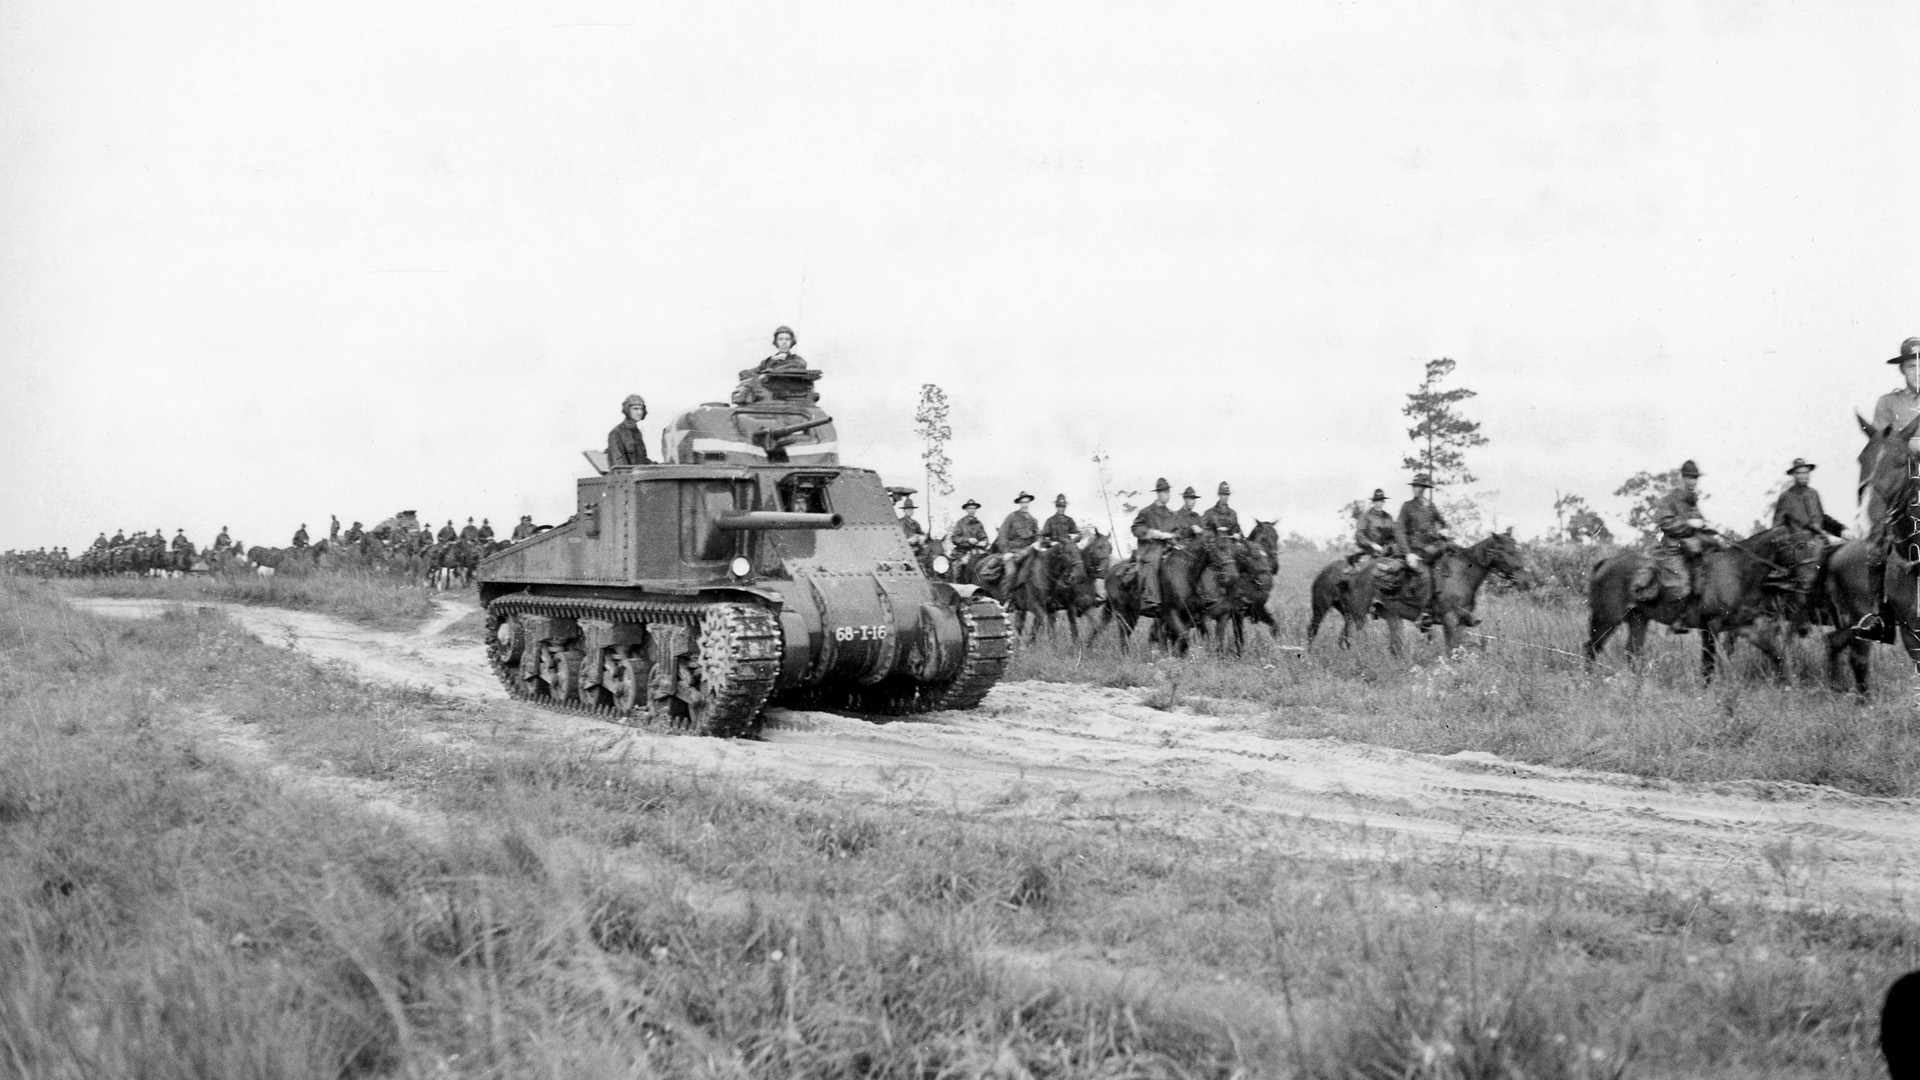 An M3 tank and mounted cavalrymen of the Third Army participate in training maneuvers in Louisiana in 1942. Training was critical as the American army grew from fewer than 500,000 members in 1939 to more than eight million men and women in 1945.